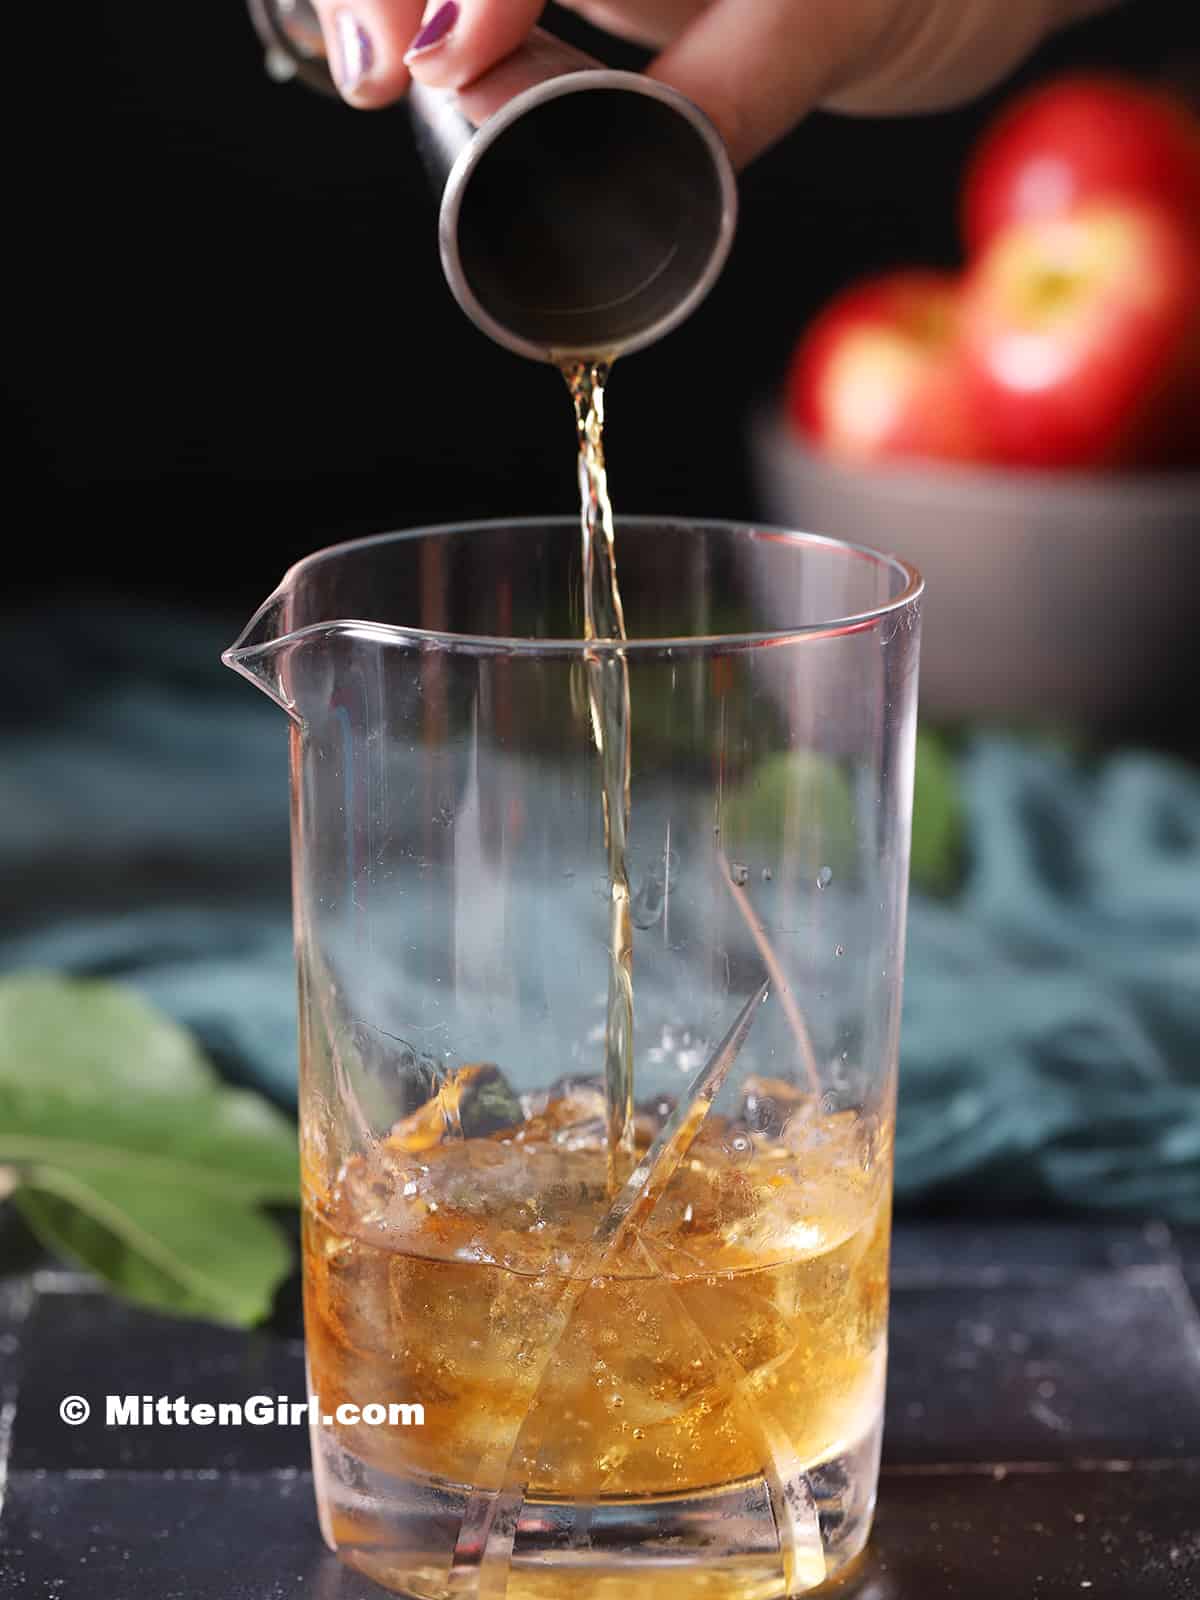 Bourbon being poured into a mixing glass with ice.